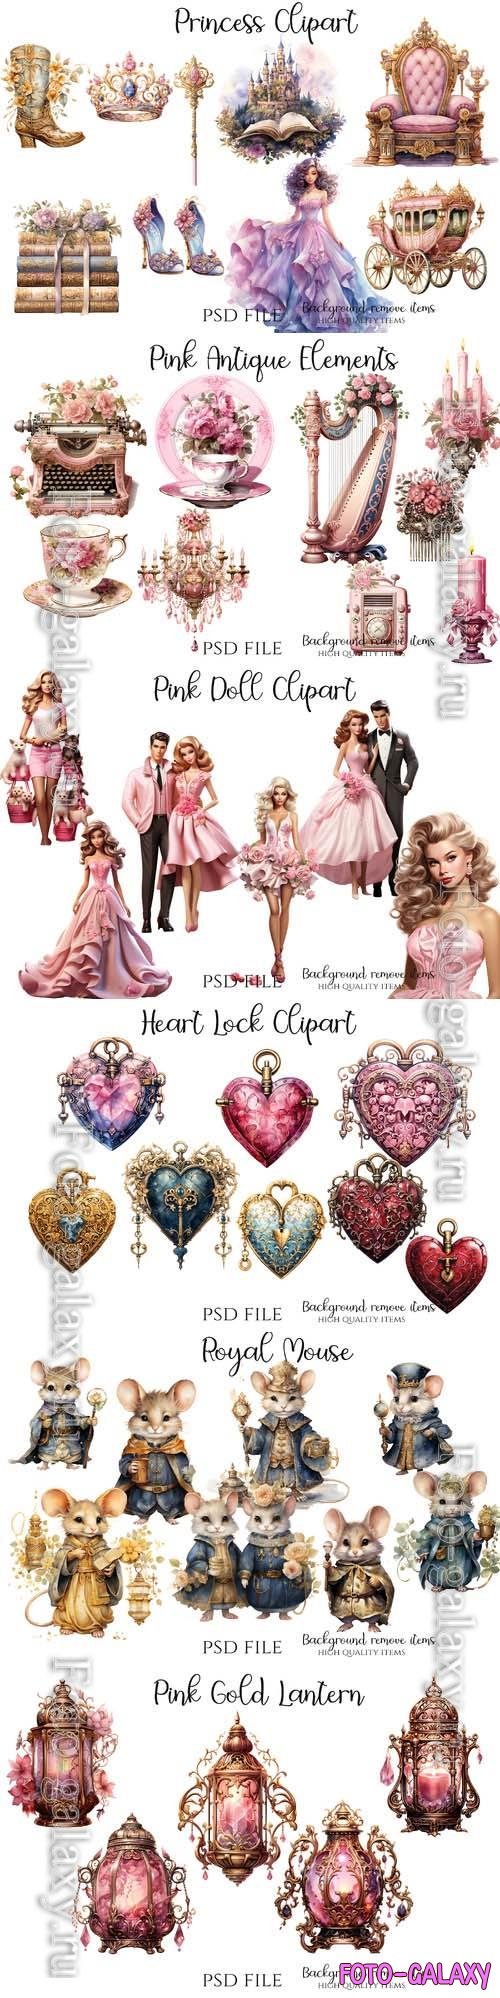 Fairy tale characters and elements, princess carriage, pink doll elements, antique elements - PSD illustration cliparts set